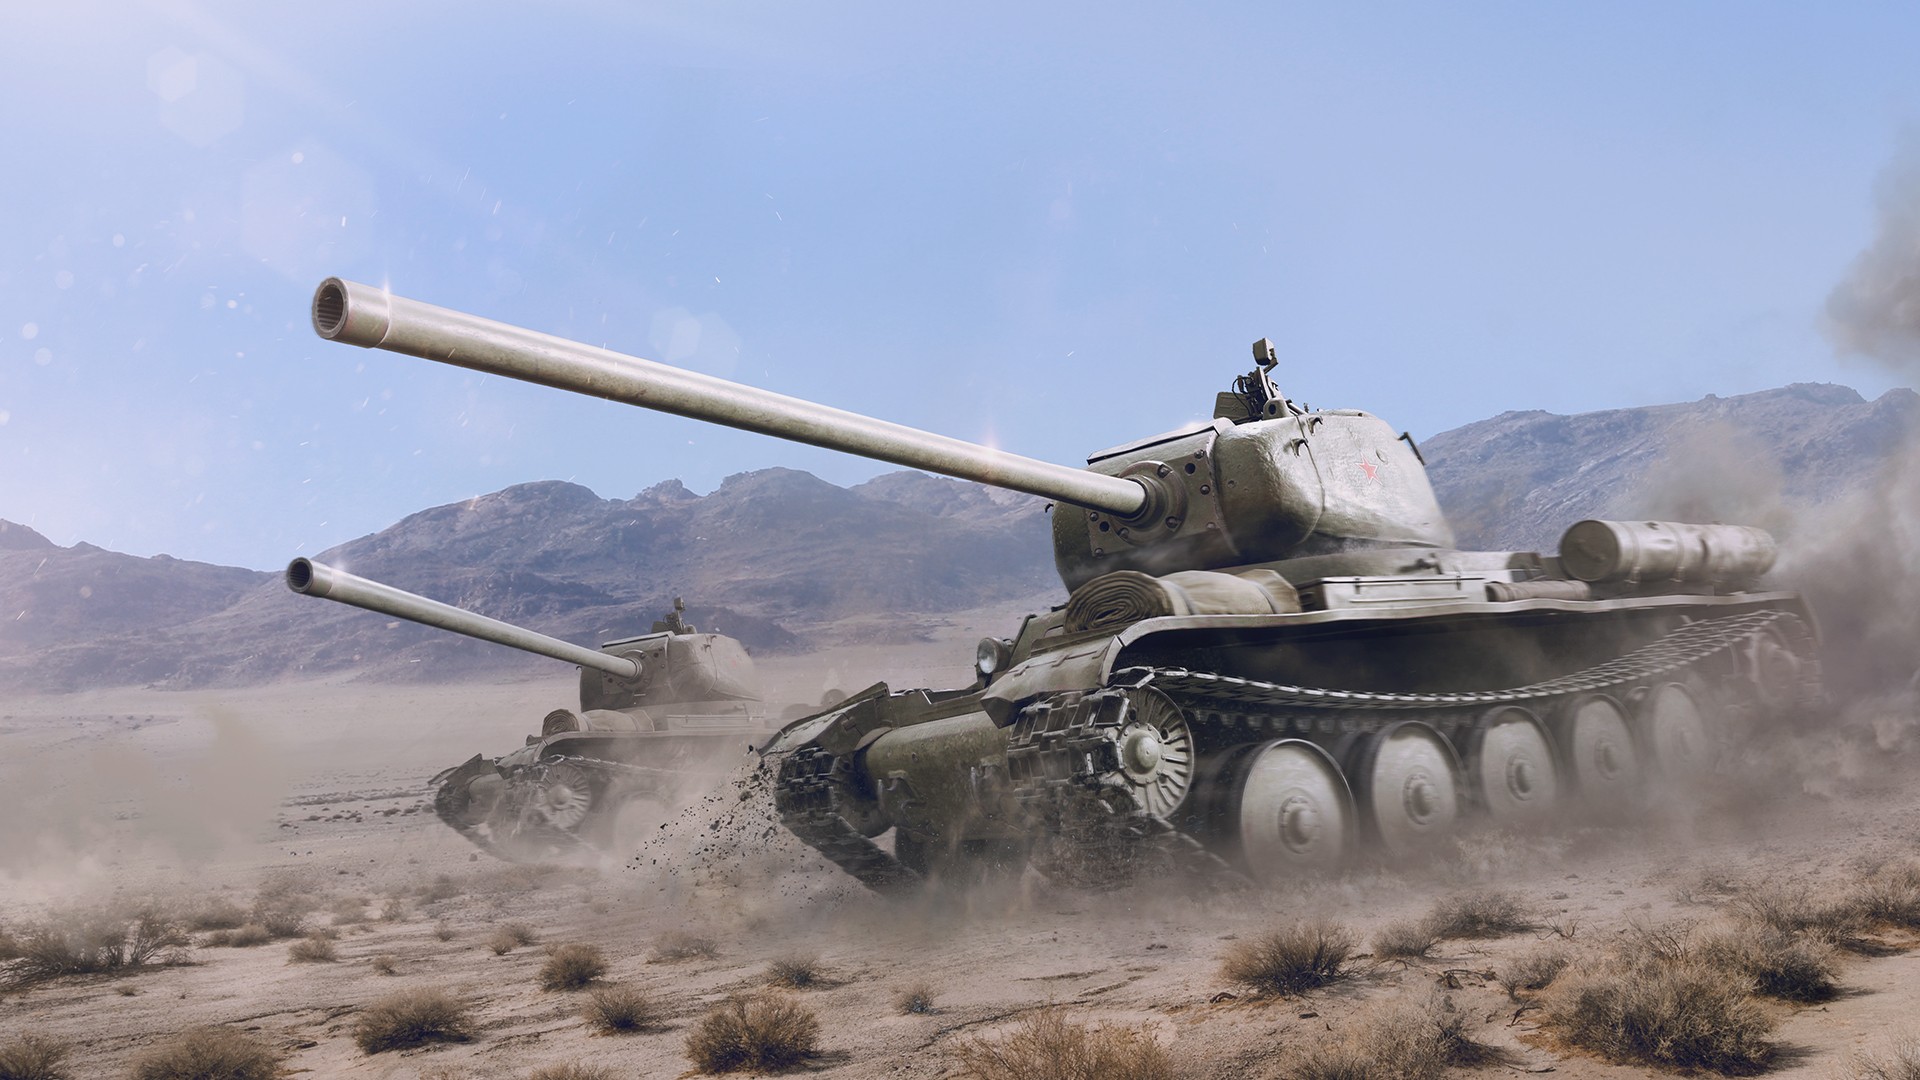 Join the Most Rewarding Season Yet with World of Tanks: Valor on Xbox One